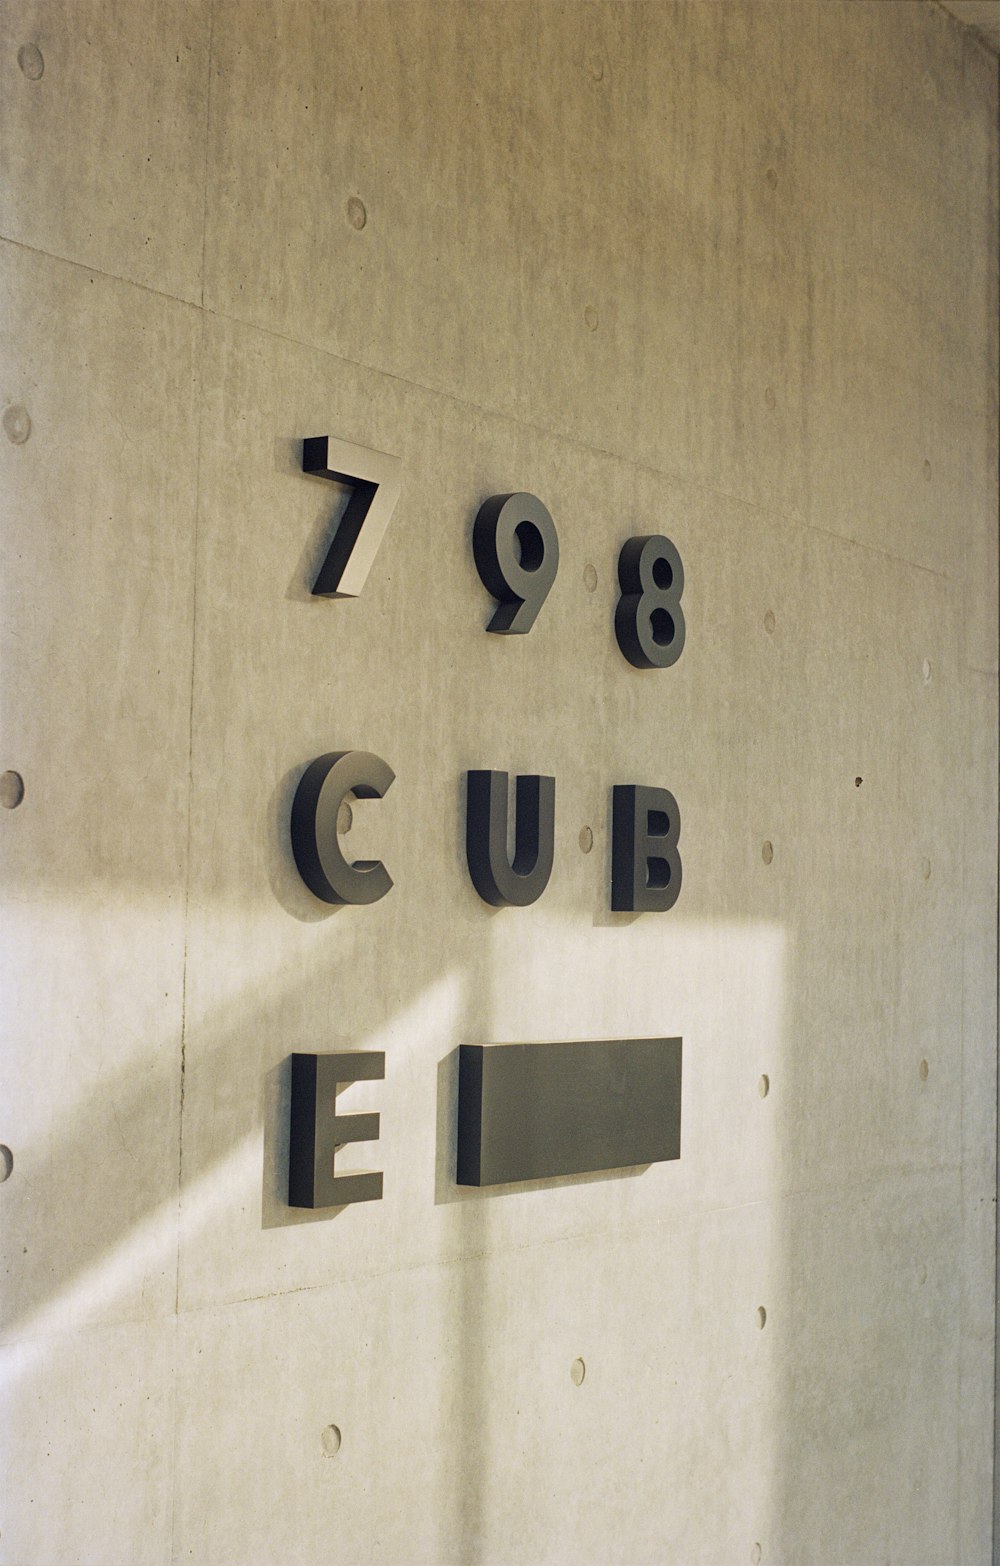 a white wall with numbers and letters on it